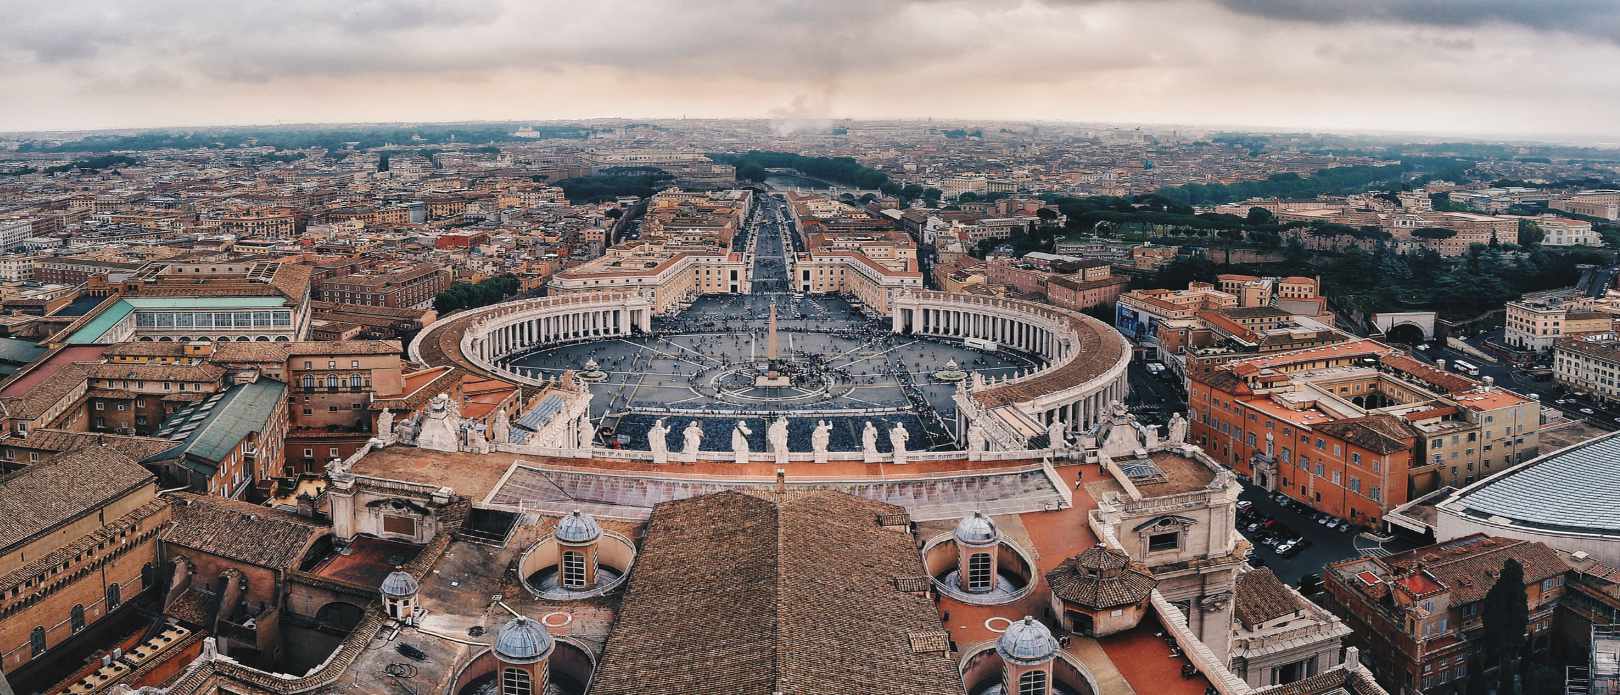 Aerial view of the Vatican city